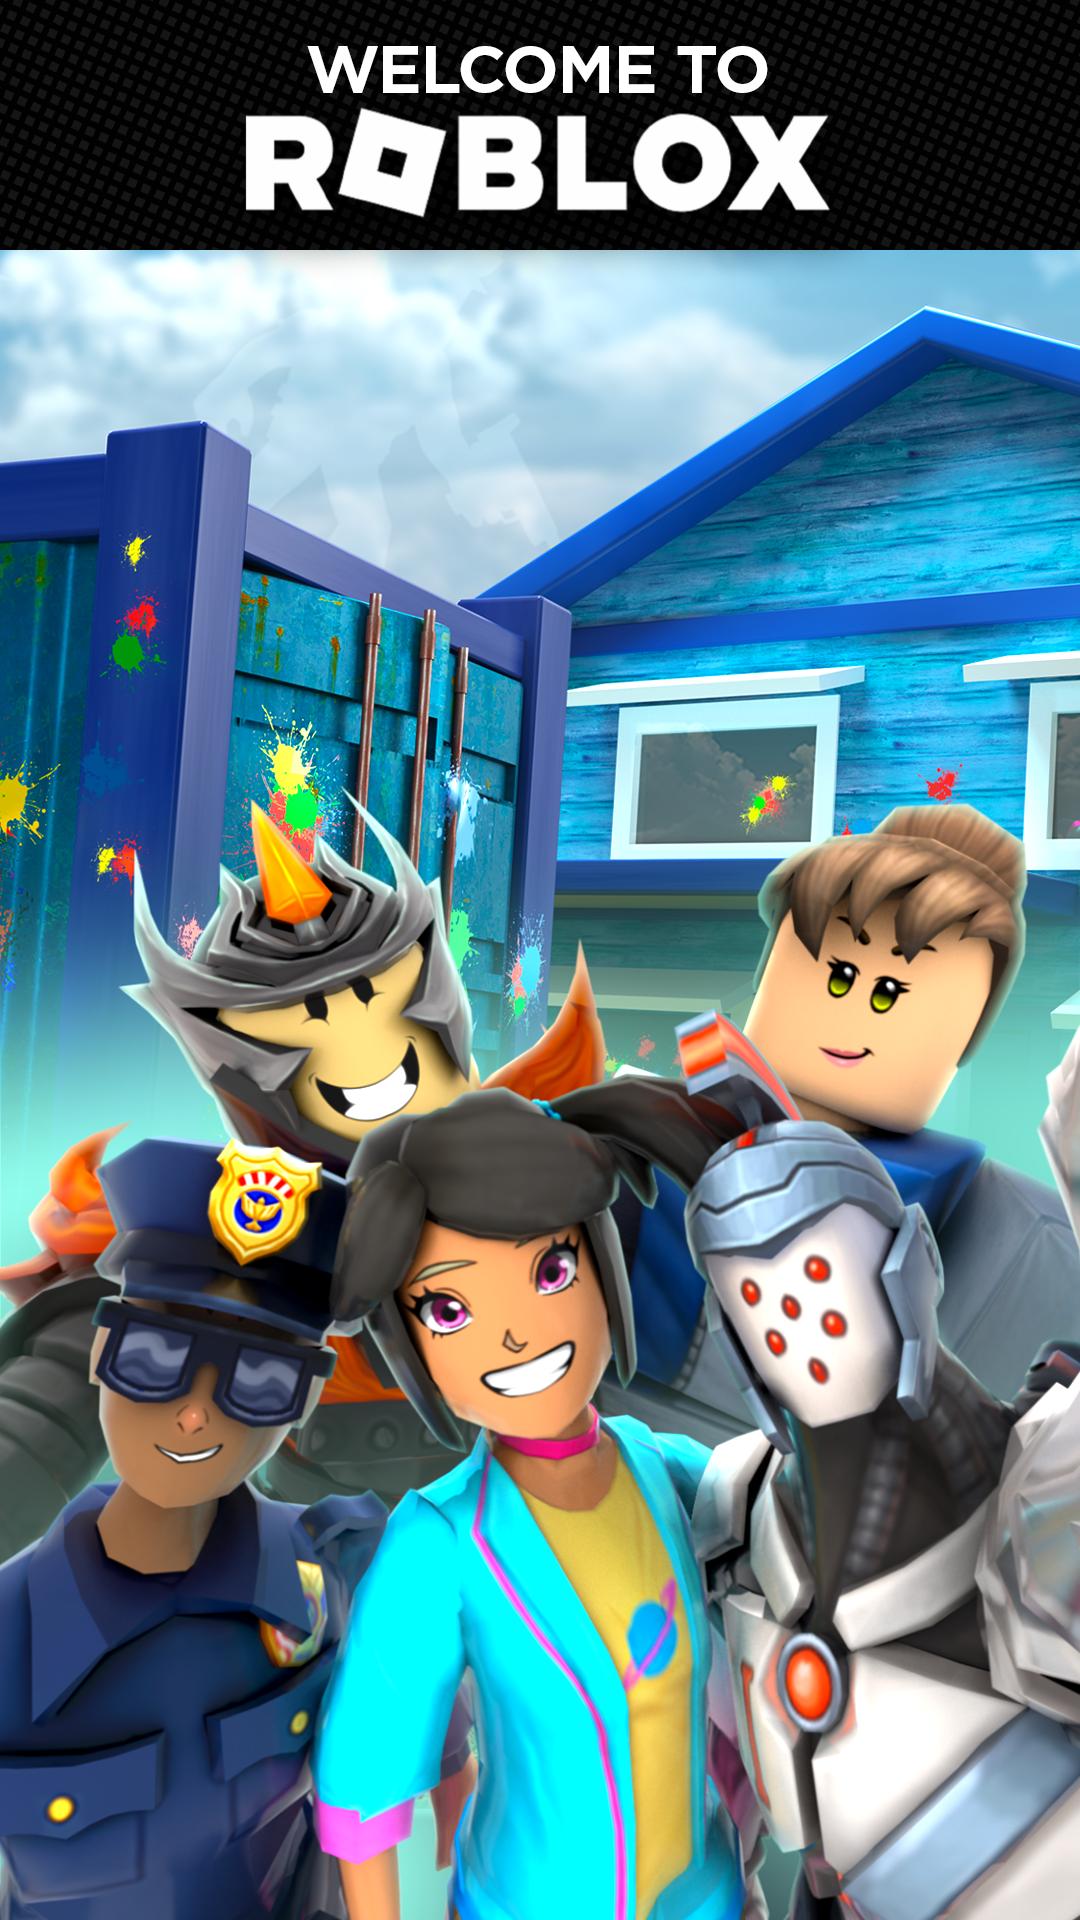 Play Roblox on PC - Download for Free at